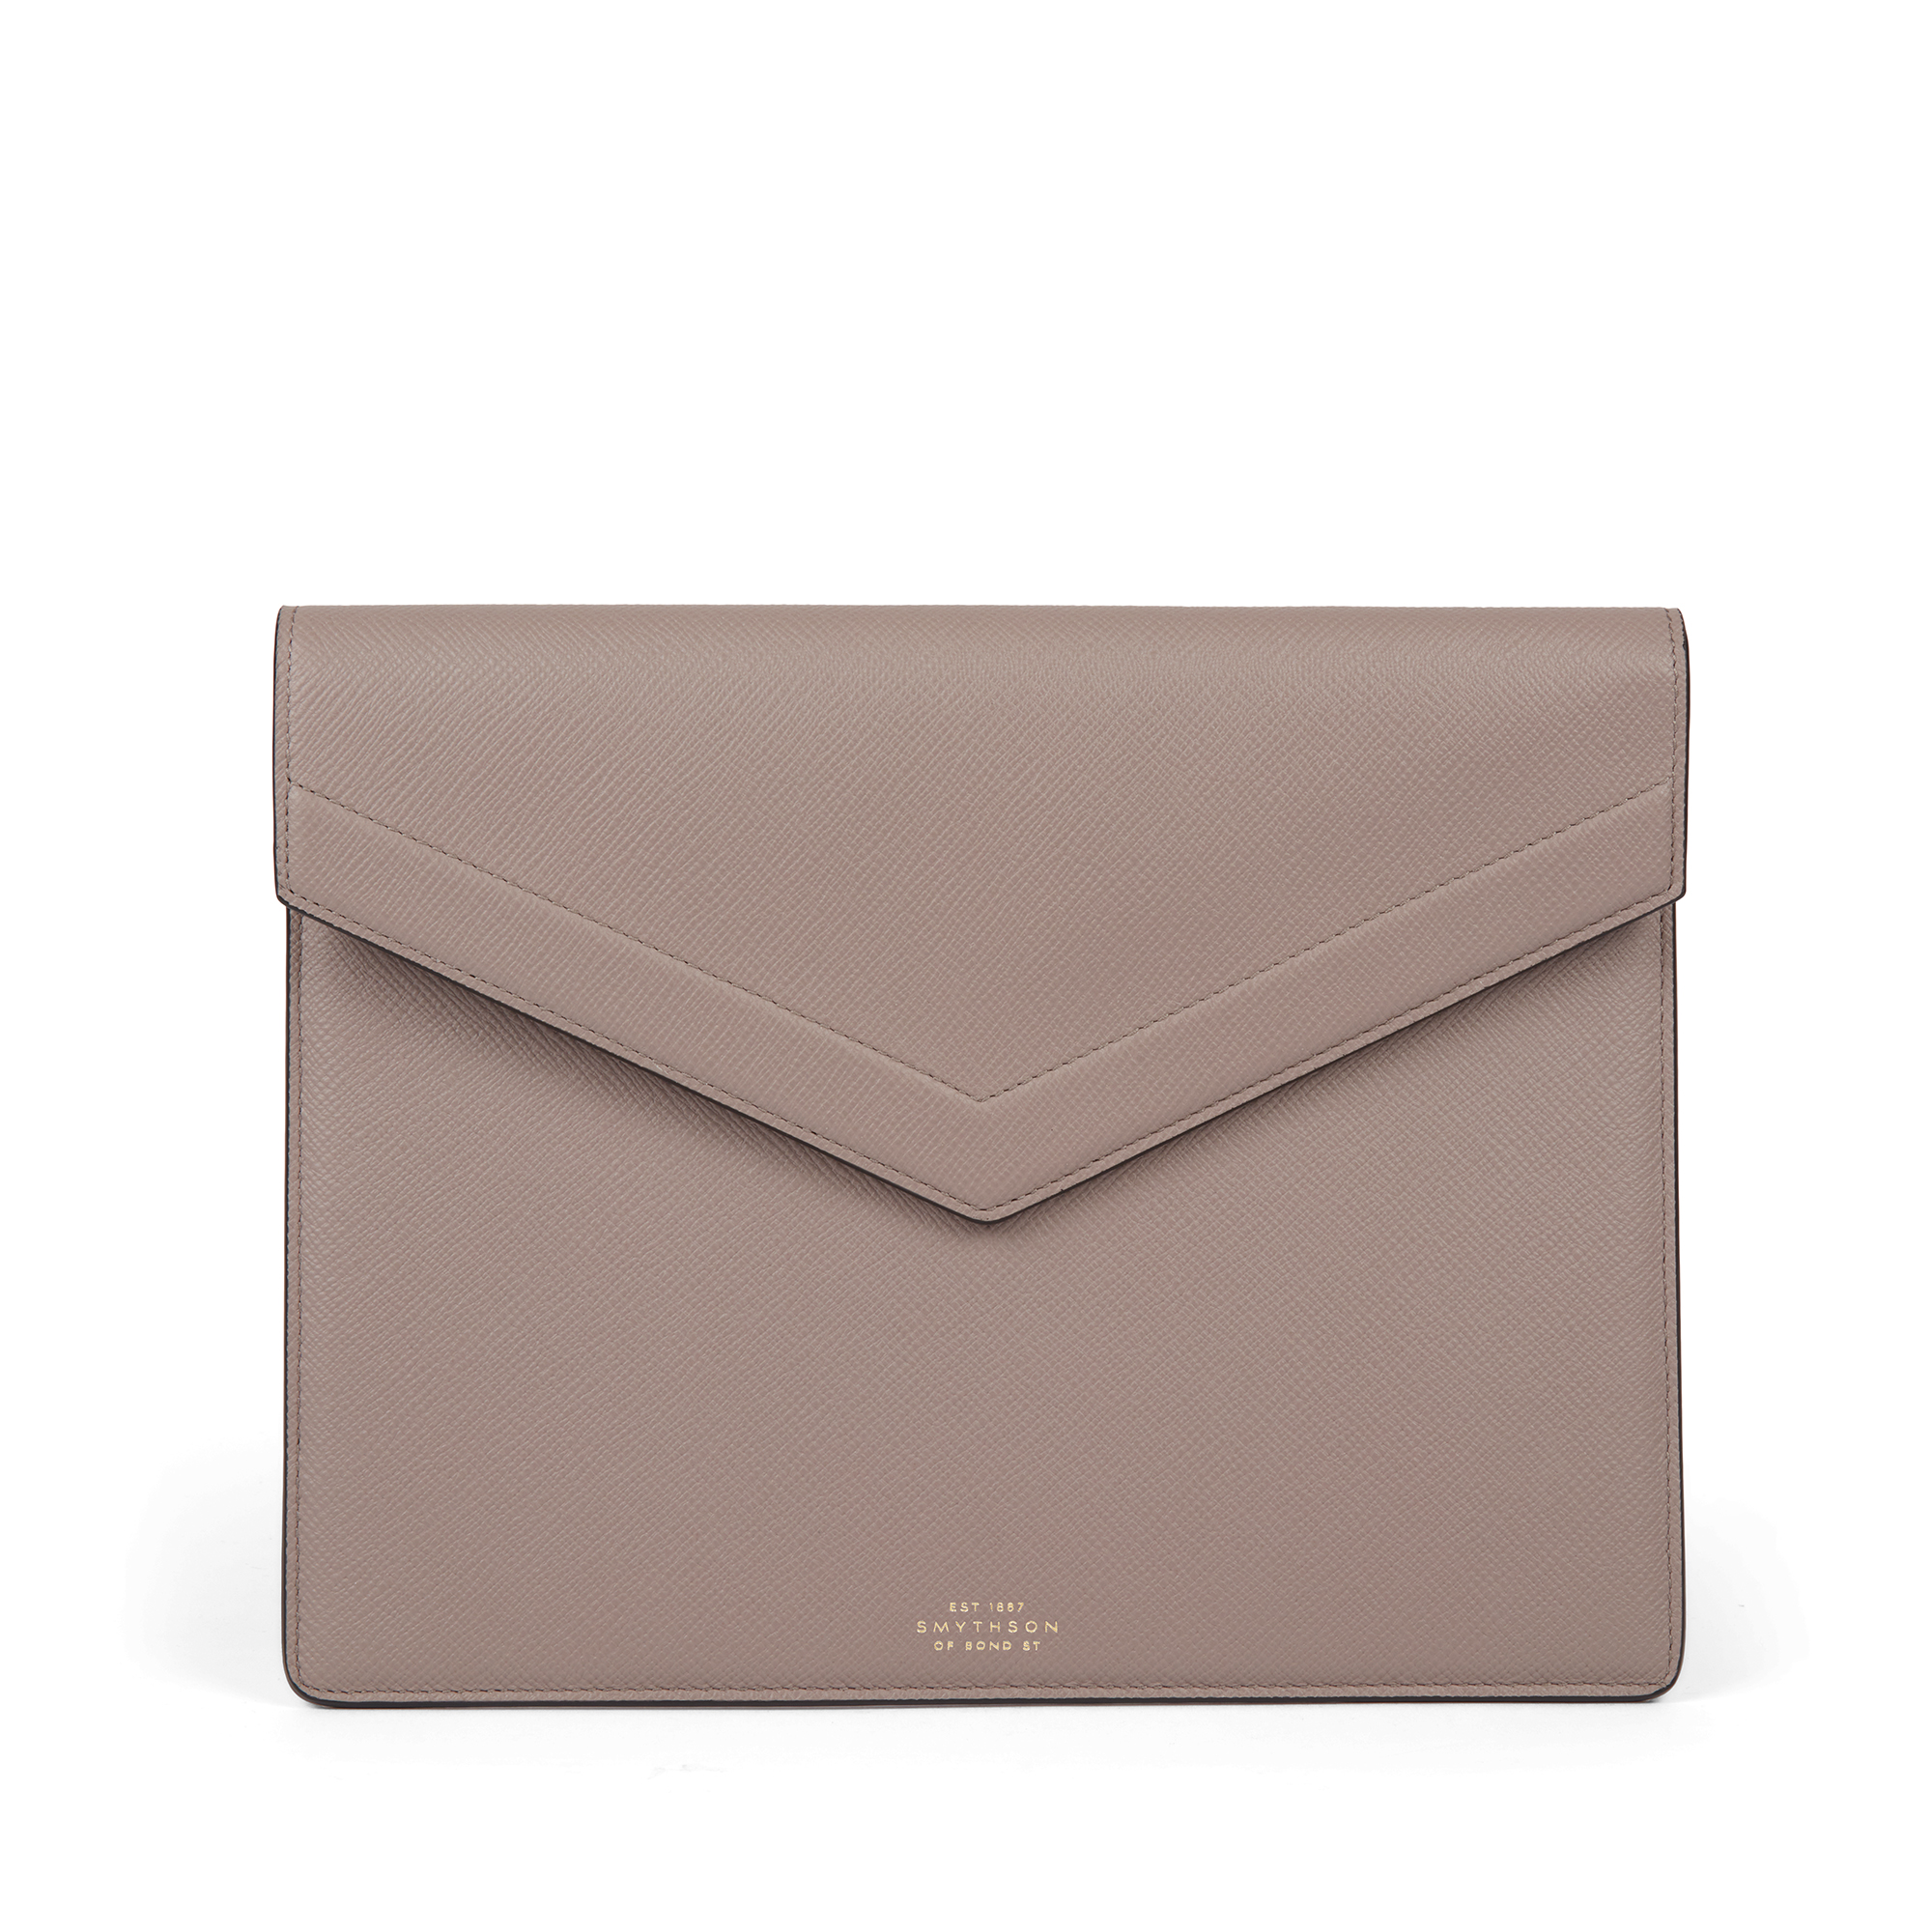 Smythson Small Envelope Folio In Panama In Taupe